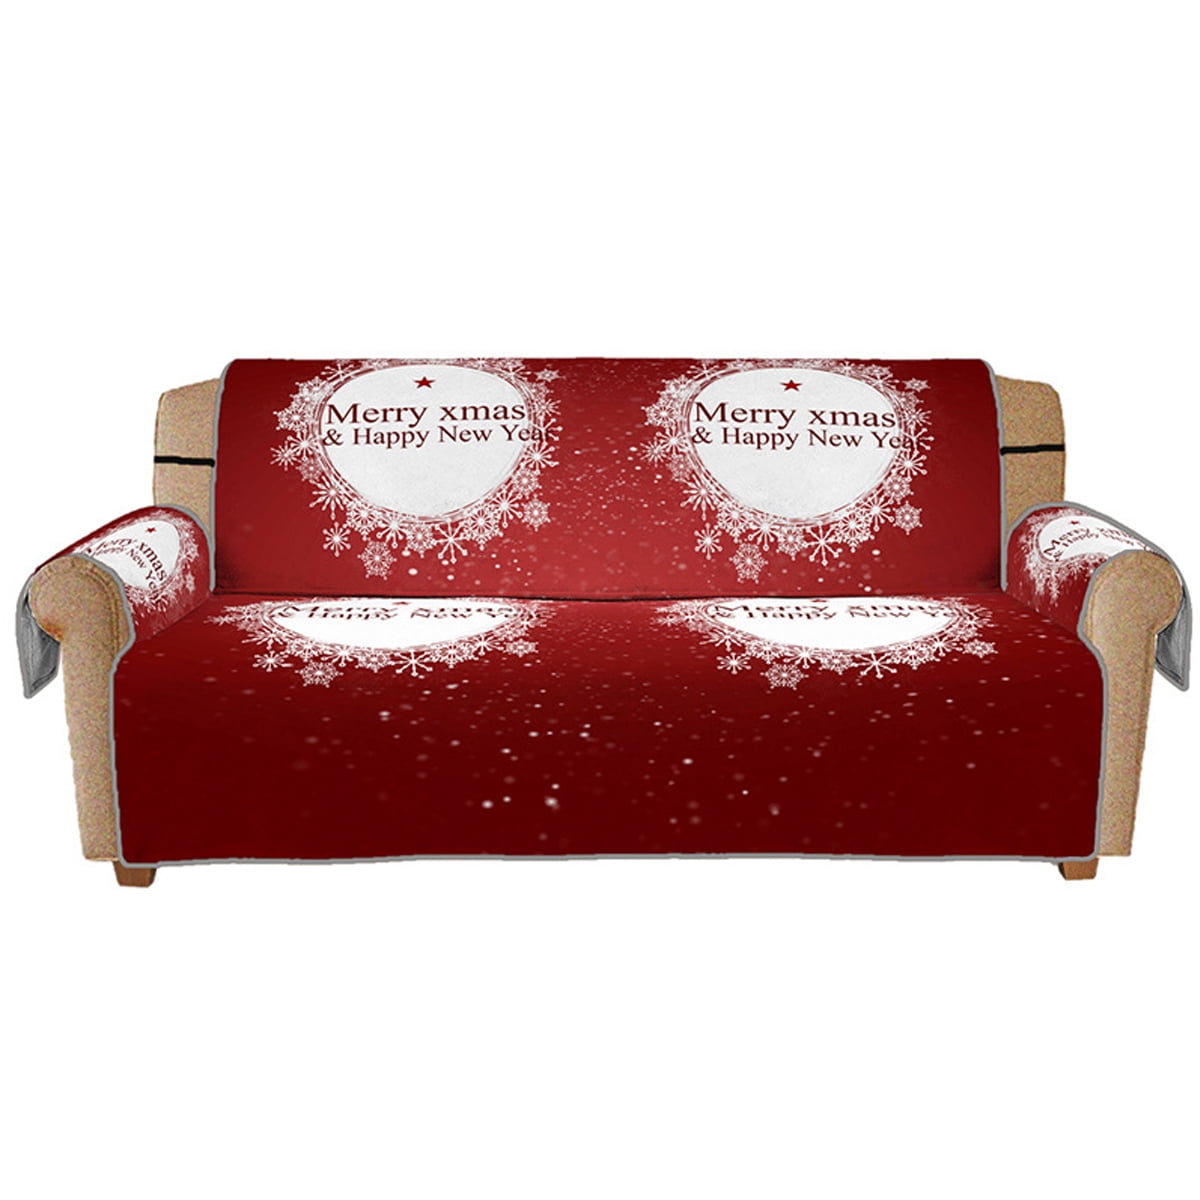 Christmas Sofa Covers Red Slipcover Couch Protector for Home Festive Decor Gifts 